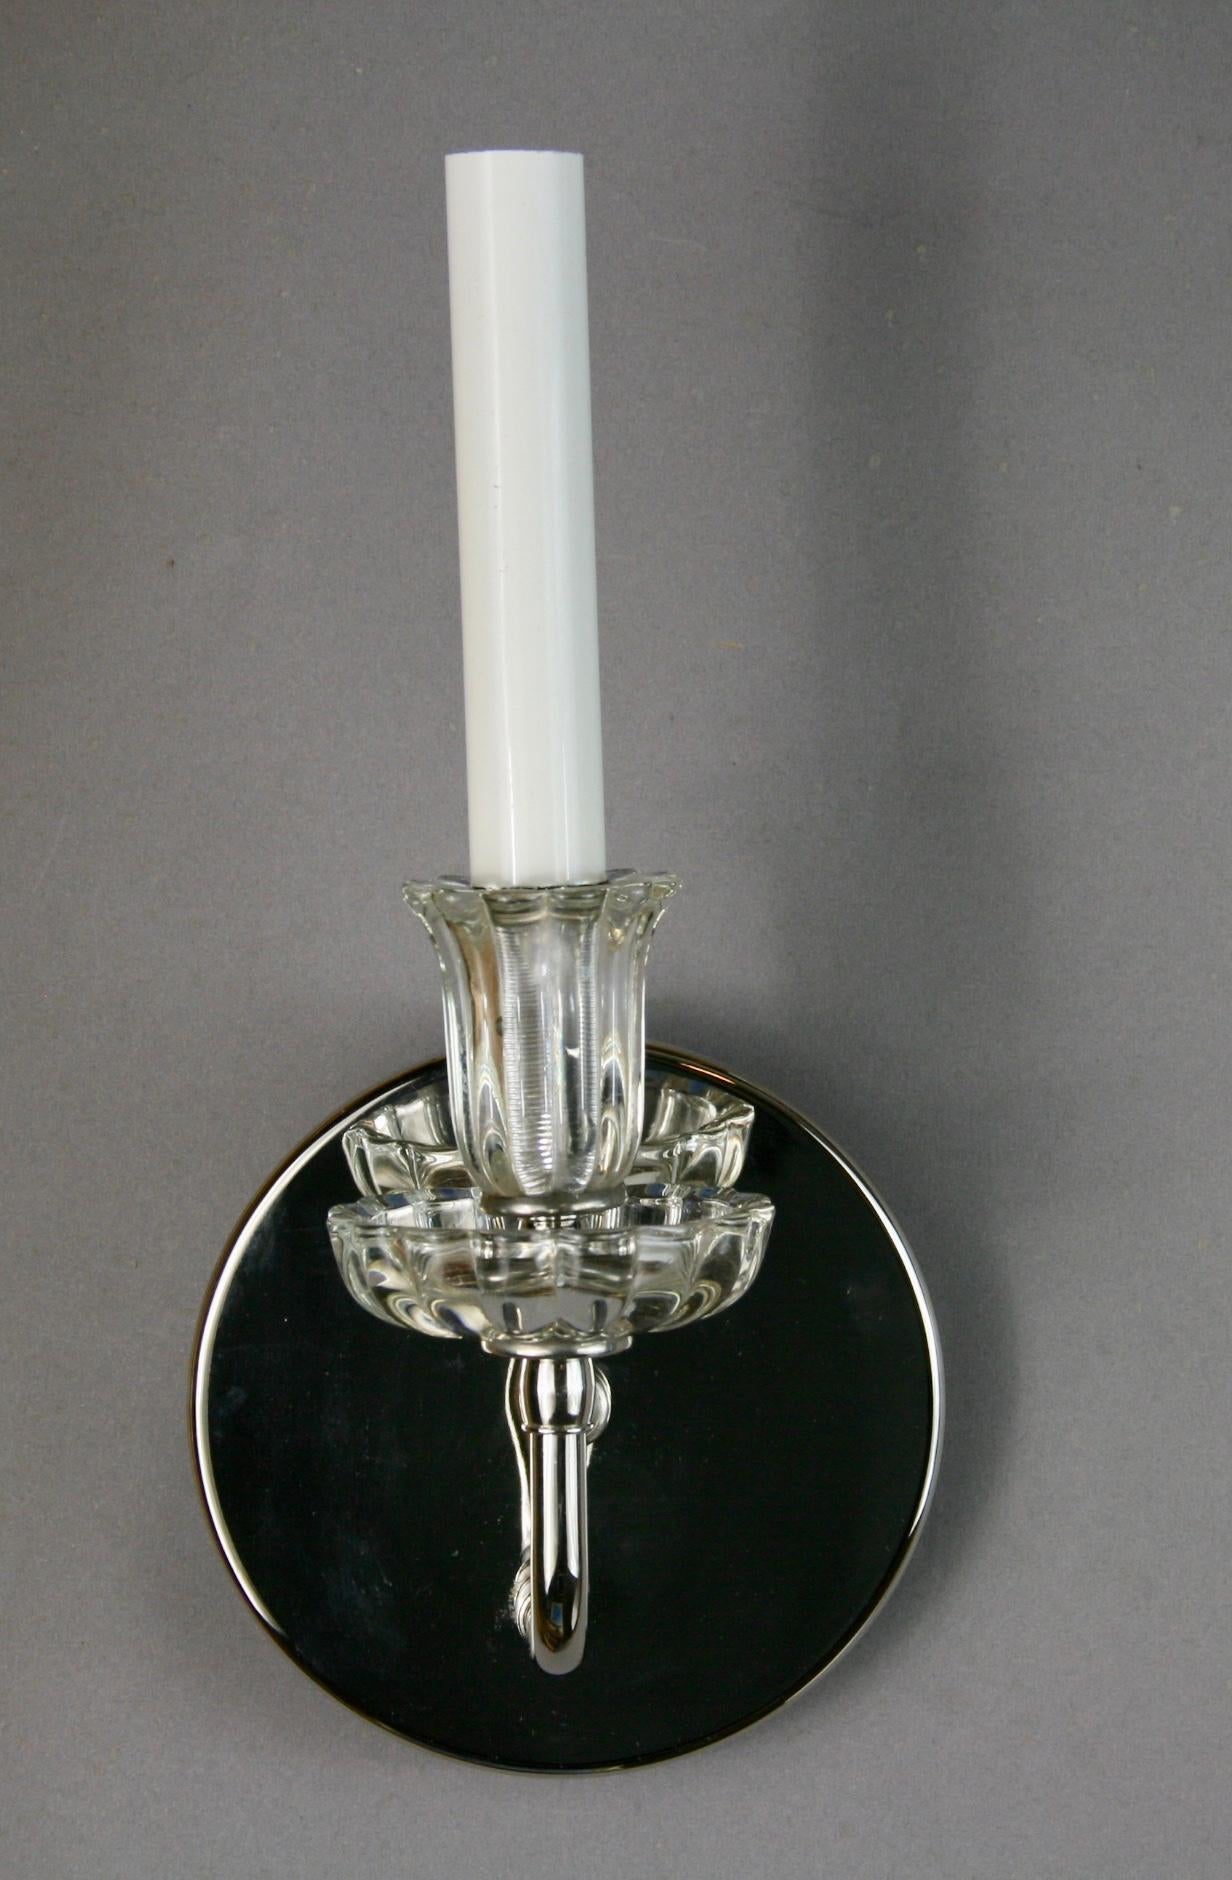 #2-1833, a pair of nickel single arm sconces featuring a glass flower shaped bobeches.
Newly rewired
2 pair available.